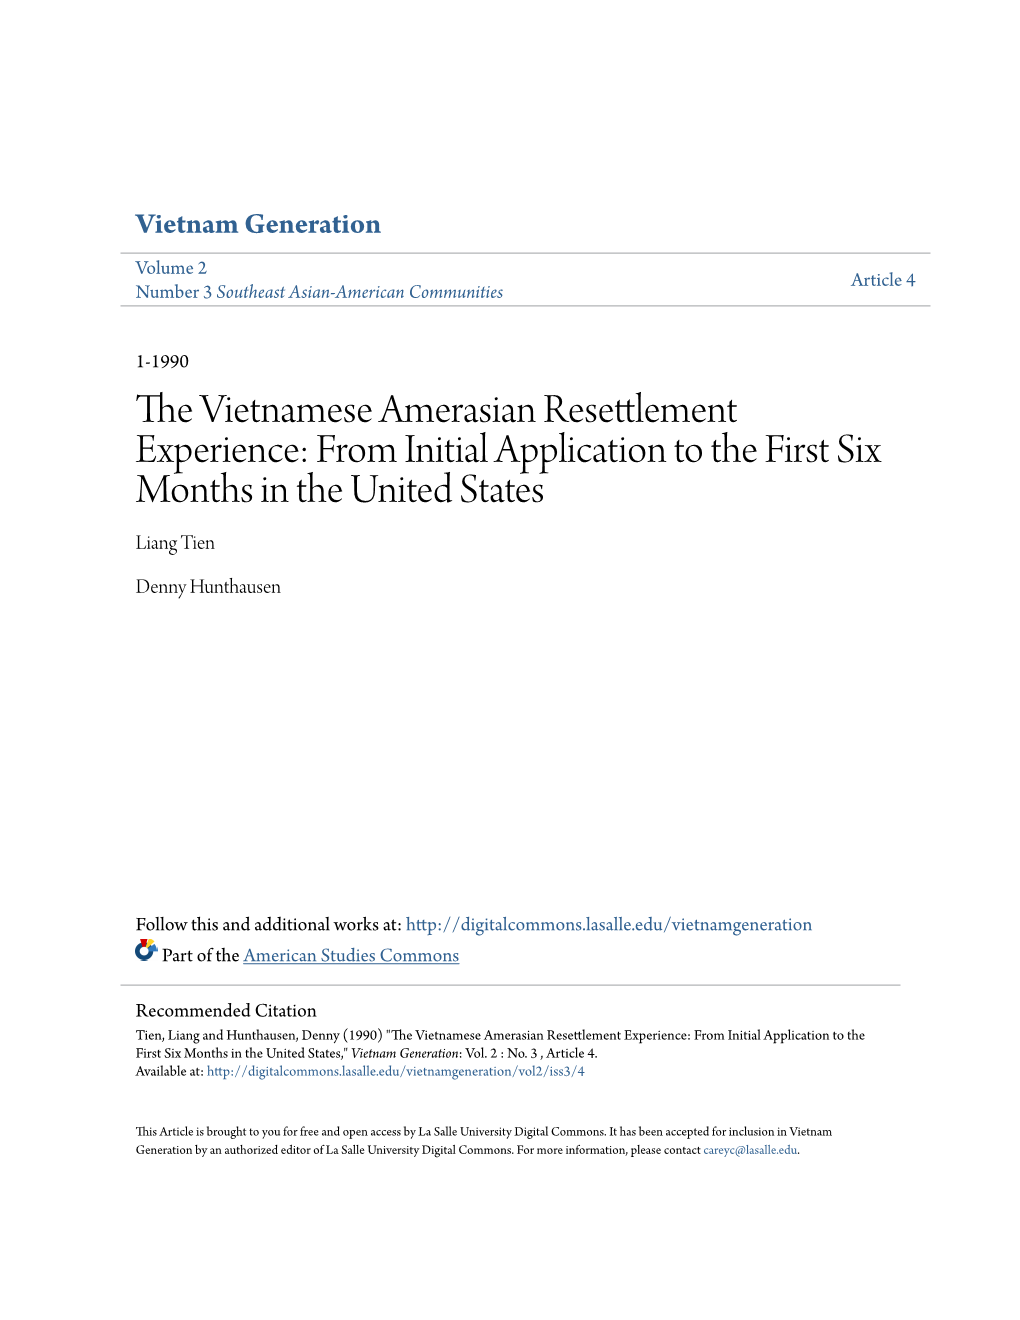 The Vietnamese Amerasian Resettlement Experience: From